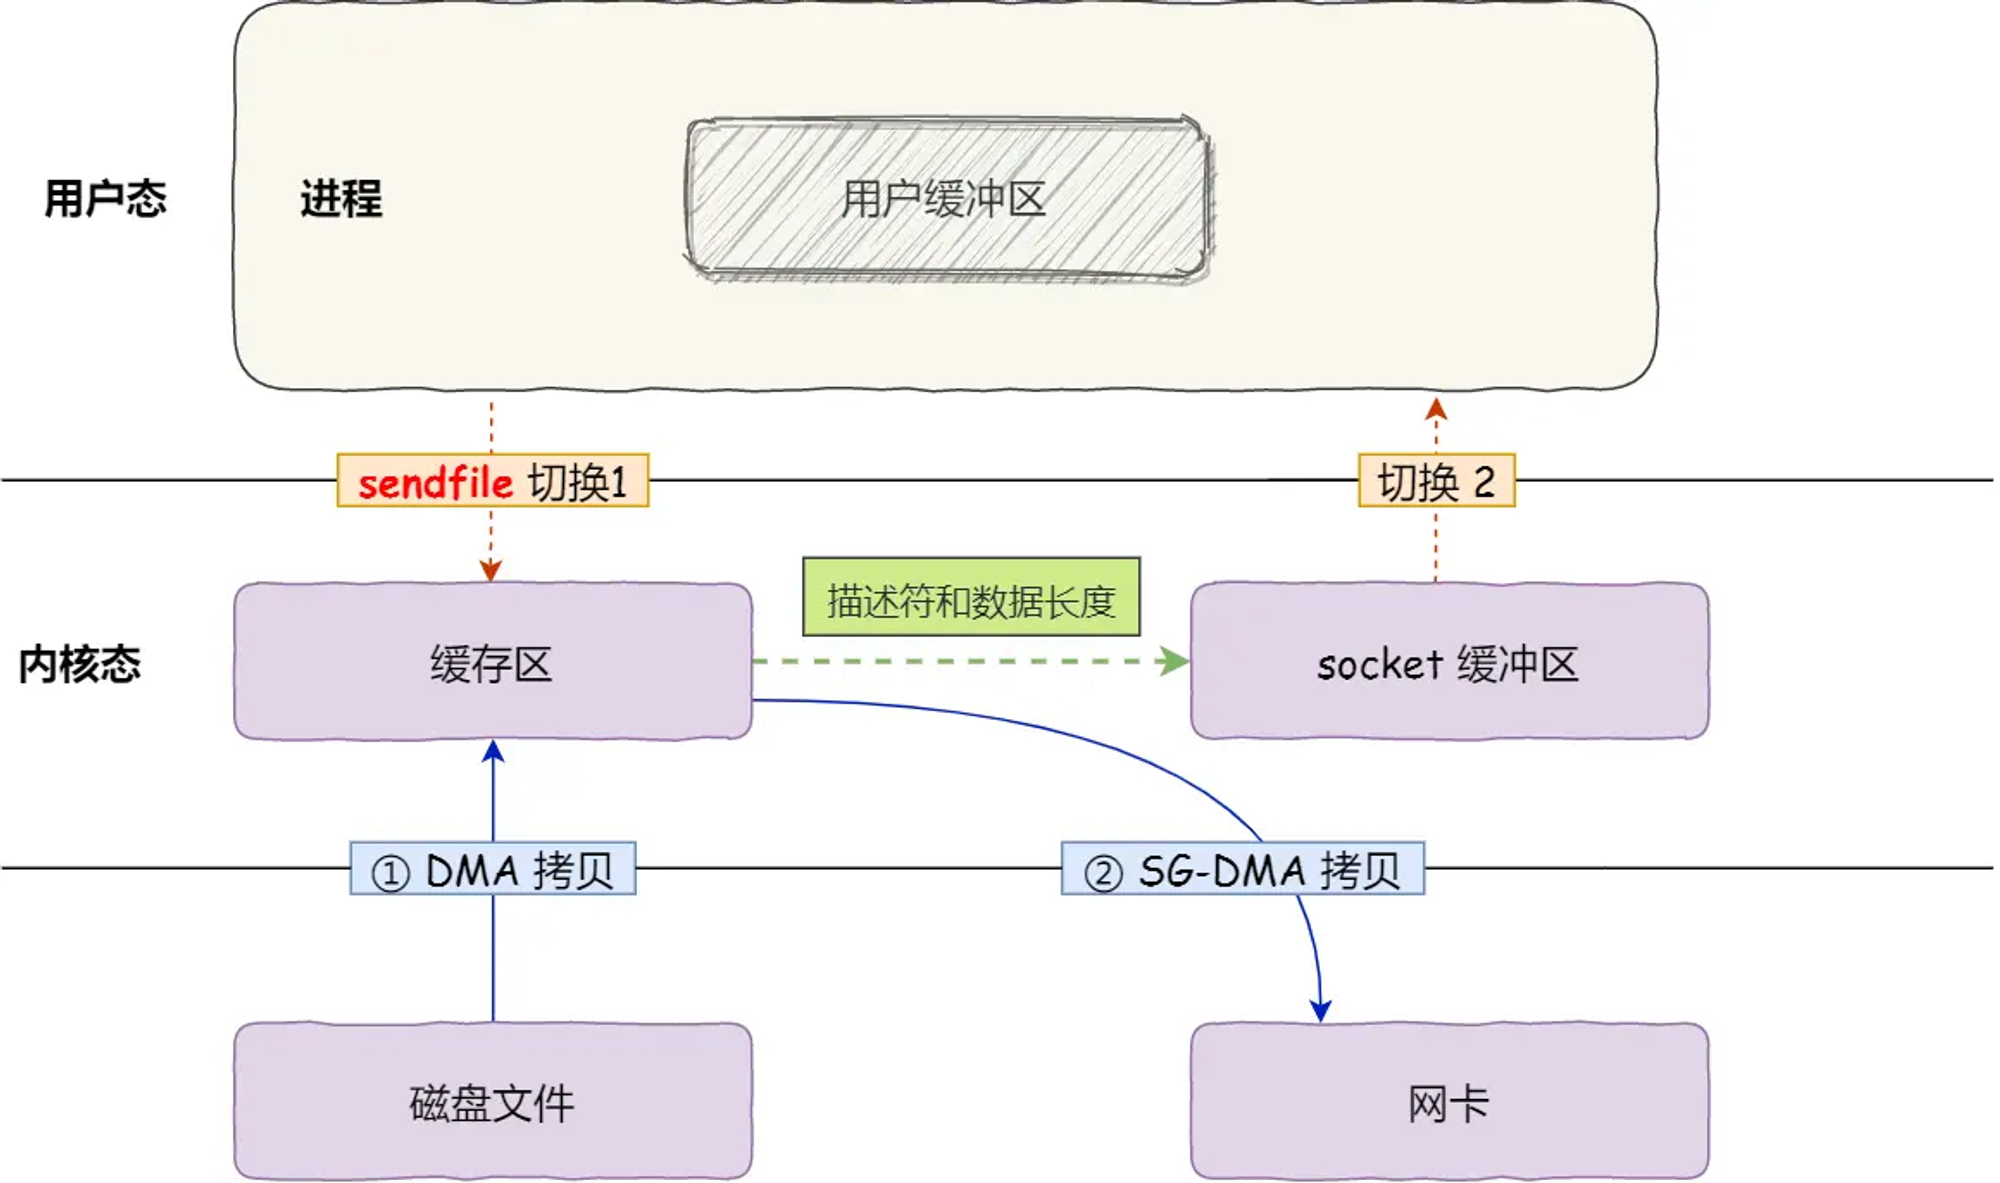 SG-DMA：必须是网卡支持The Scatter-Gather Direct Memory Access技术才可使用。